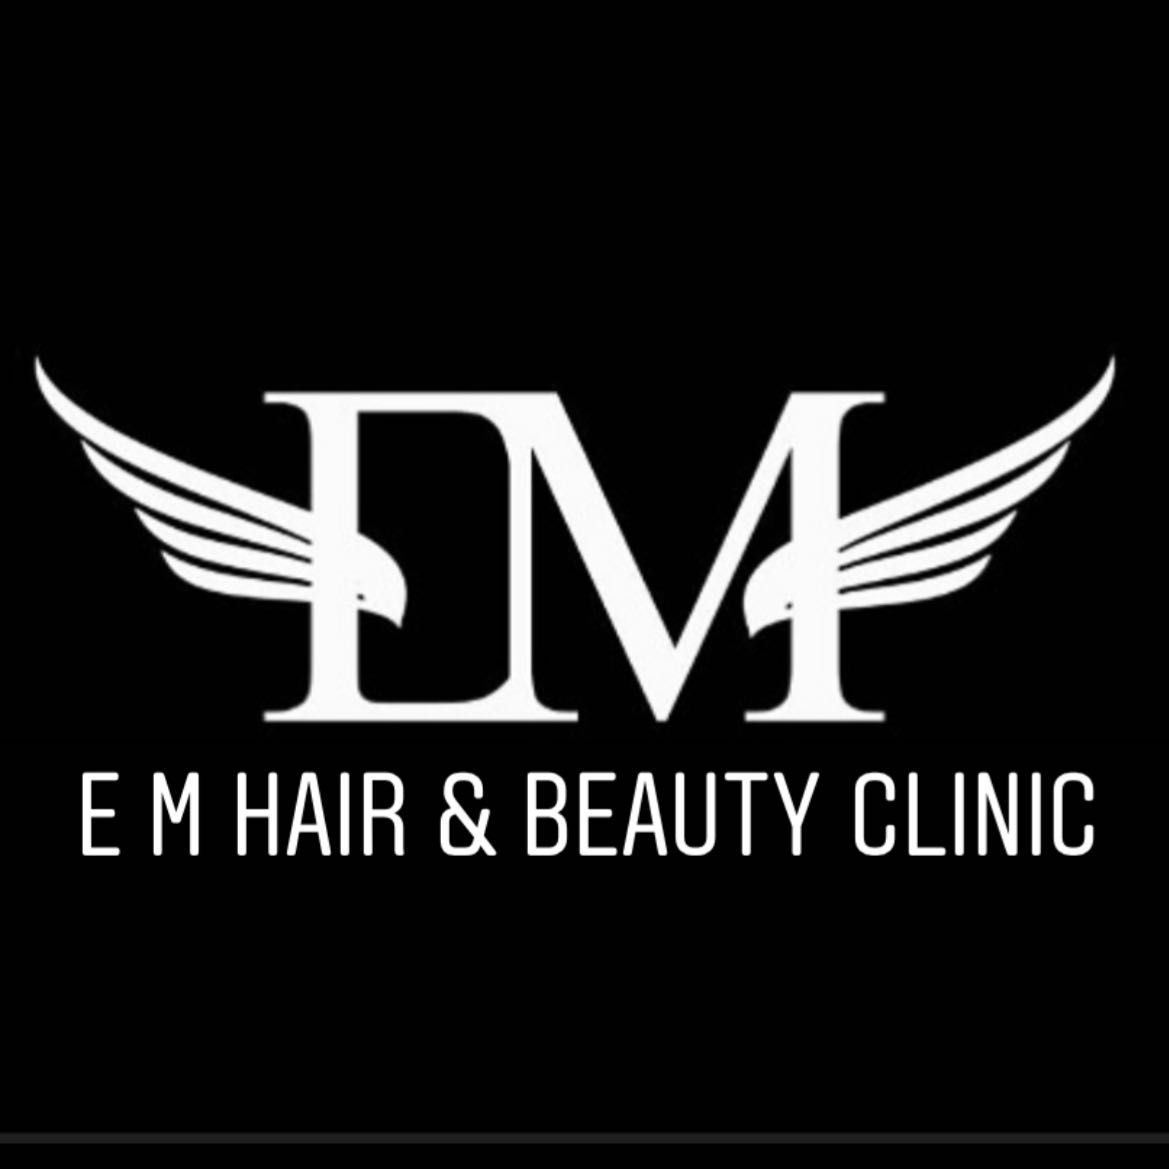 EM hair & beauty clinic, 63a picton road, L15 4LF, Liverpool